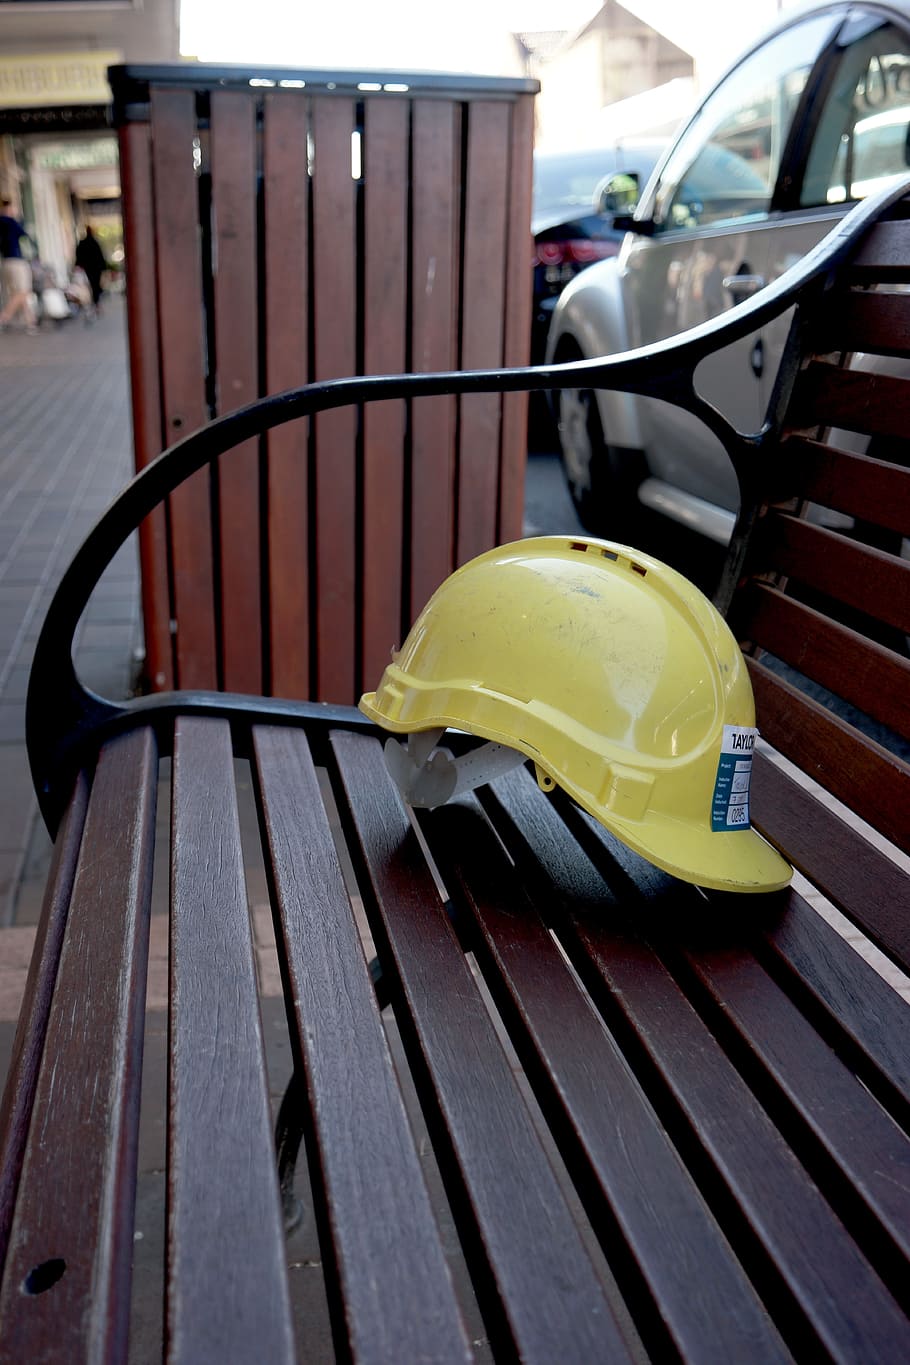 hard hat, hat, safety, hard, helmet, industry, protection, worker, yellow, industrial